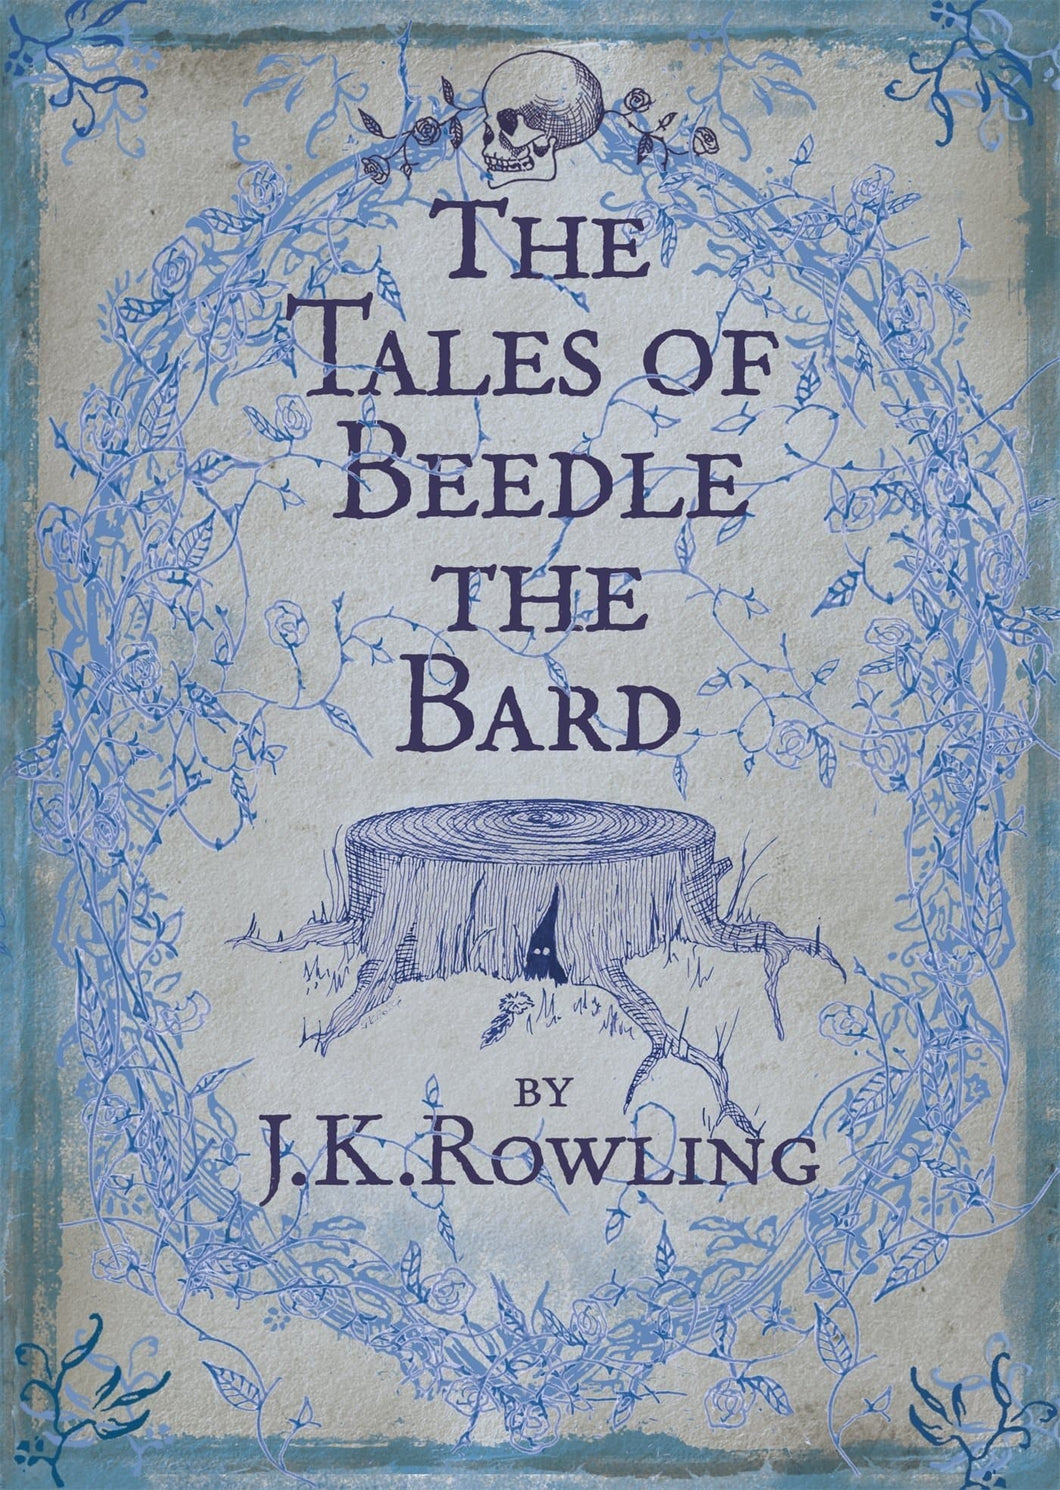 The Tales of Beedle the Bard [HARDCOVER]